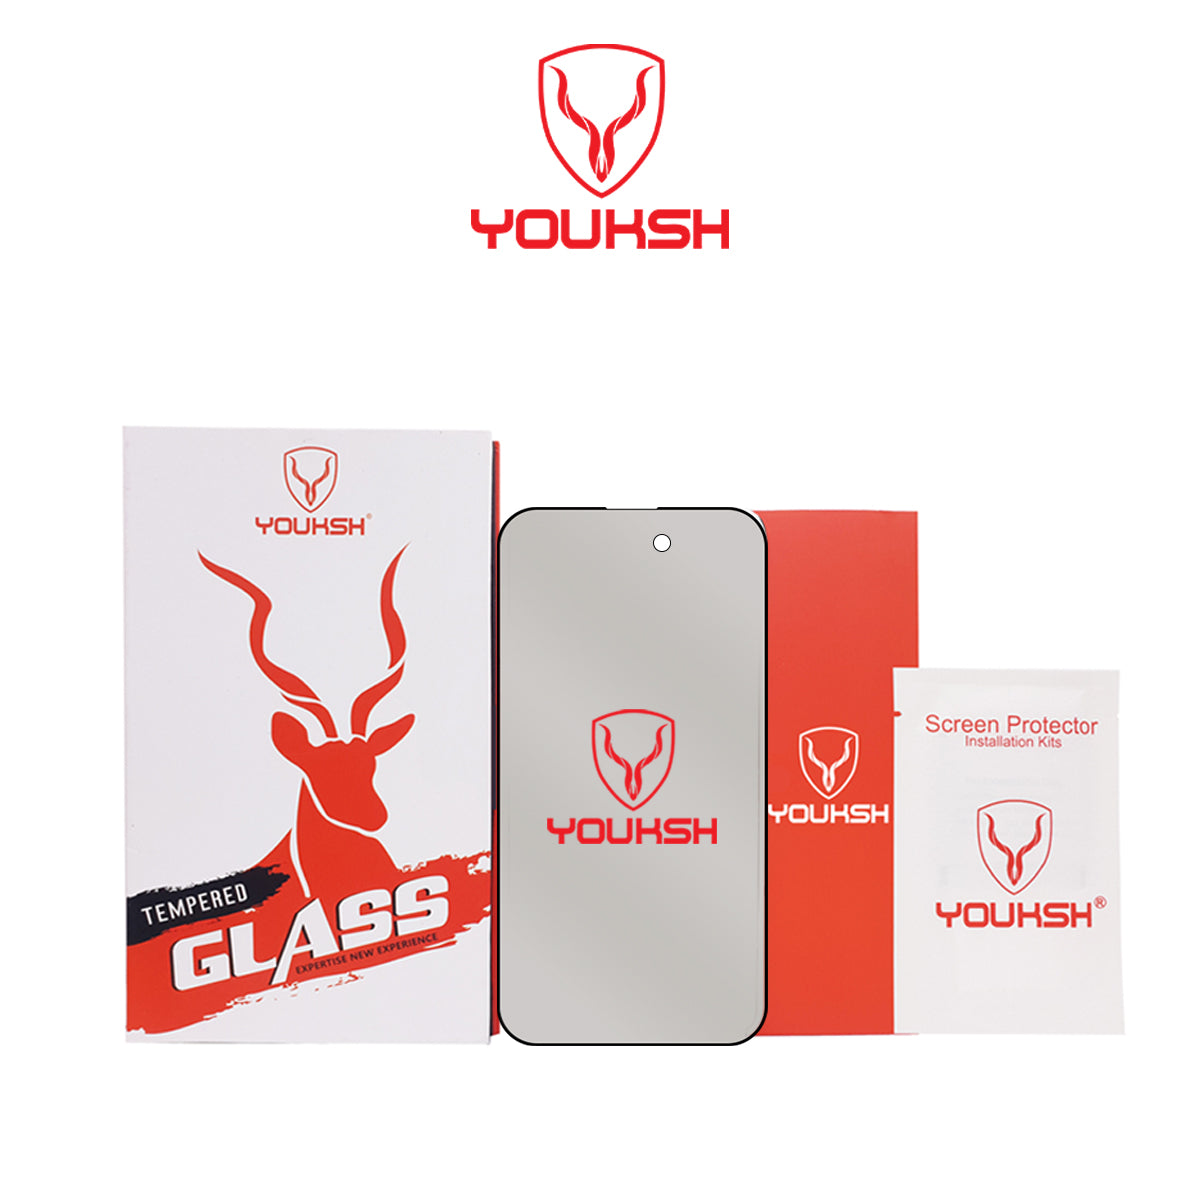 YOUKSH Apple iPhone 15 Pro (6.1) Privacy Glass Protector - YOUKSH Apple iPhone 15 Pro (6.1) Anti Static Glass Protector - With YOUKSH Installation kit.